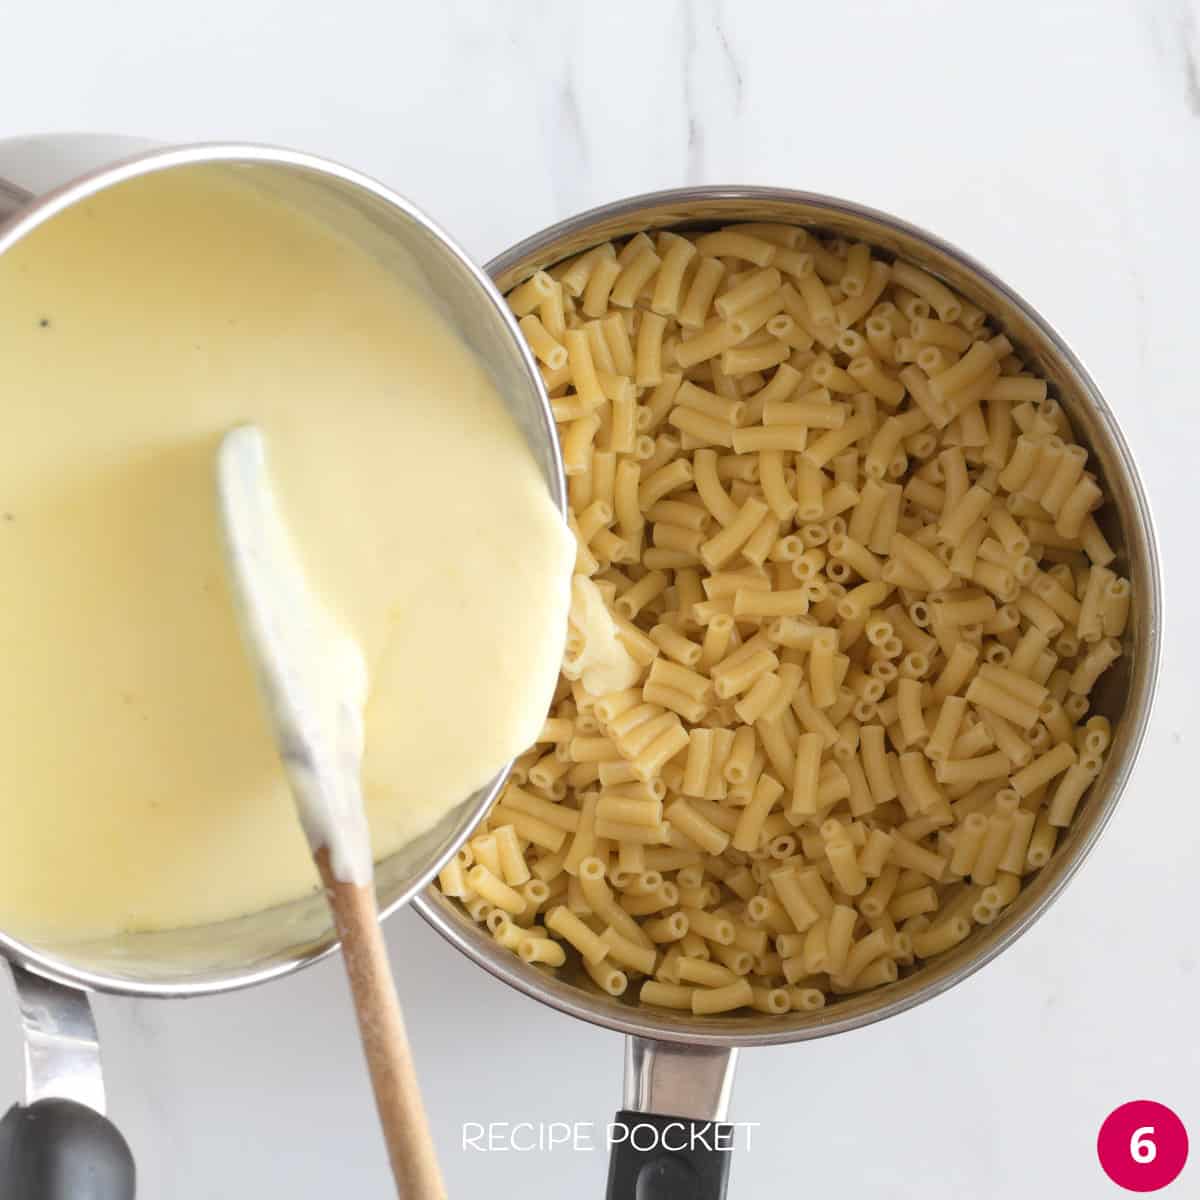 Cheese sauce being poured over cooked pasta.